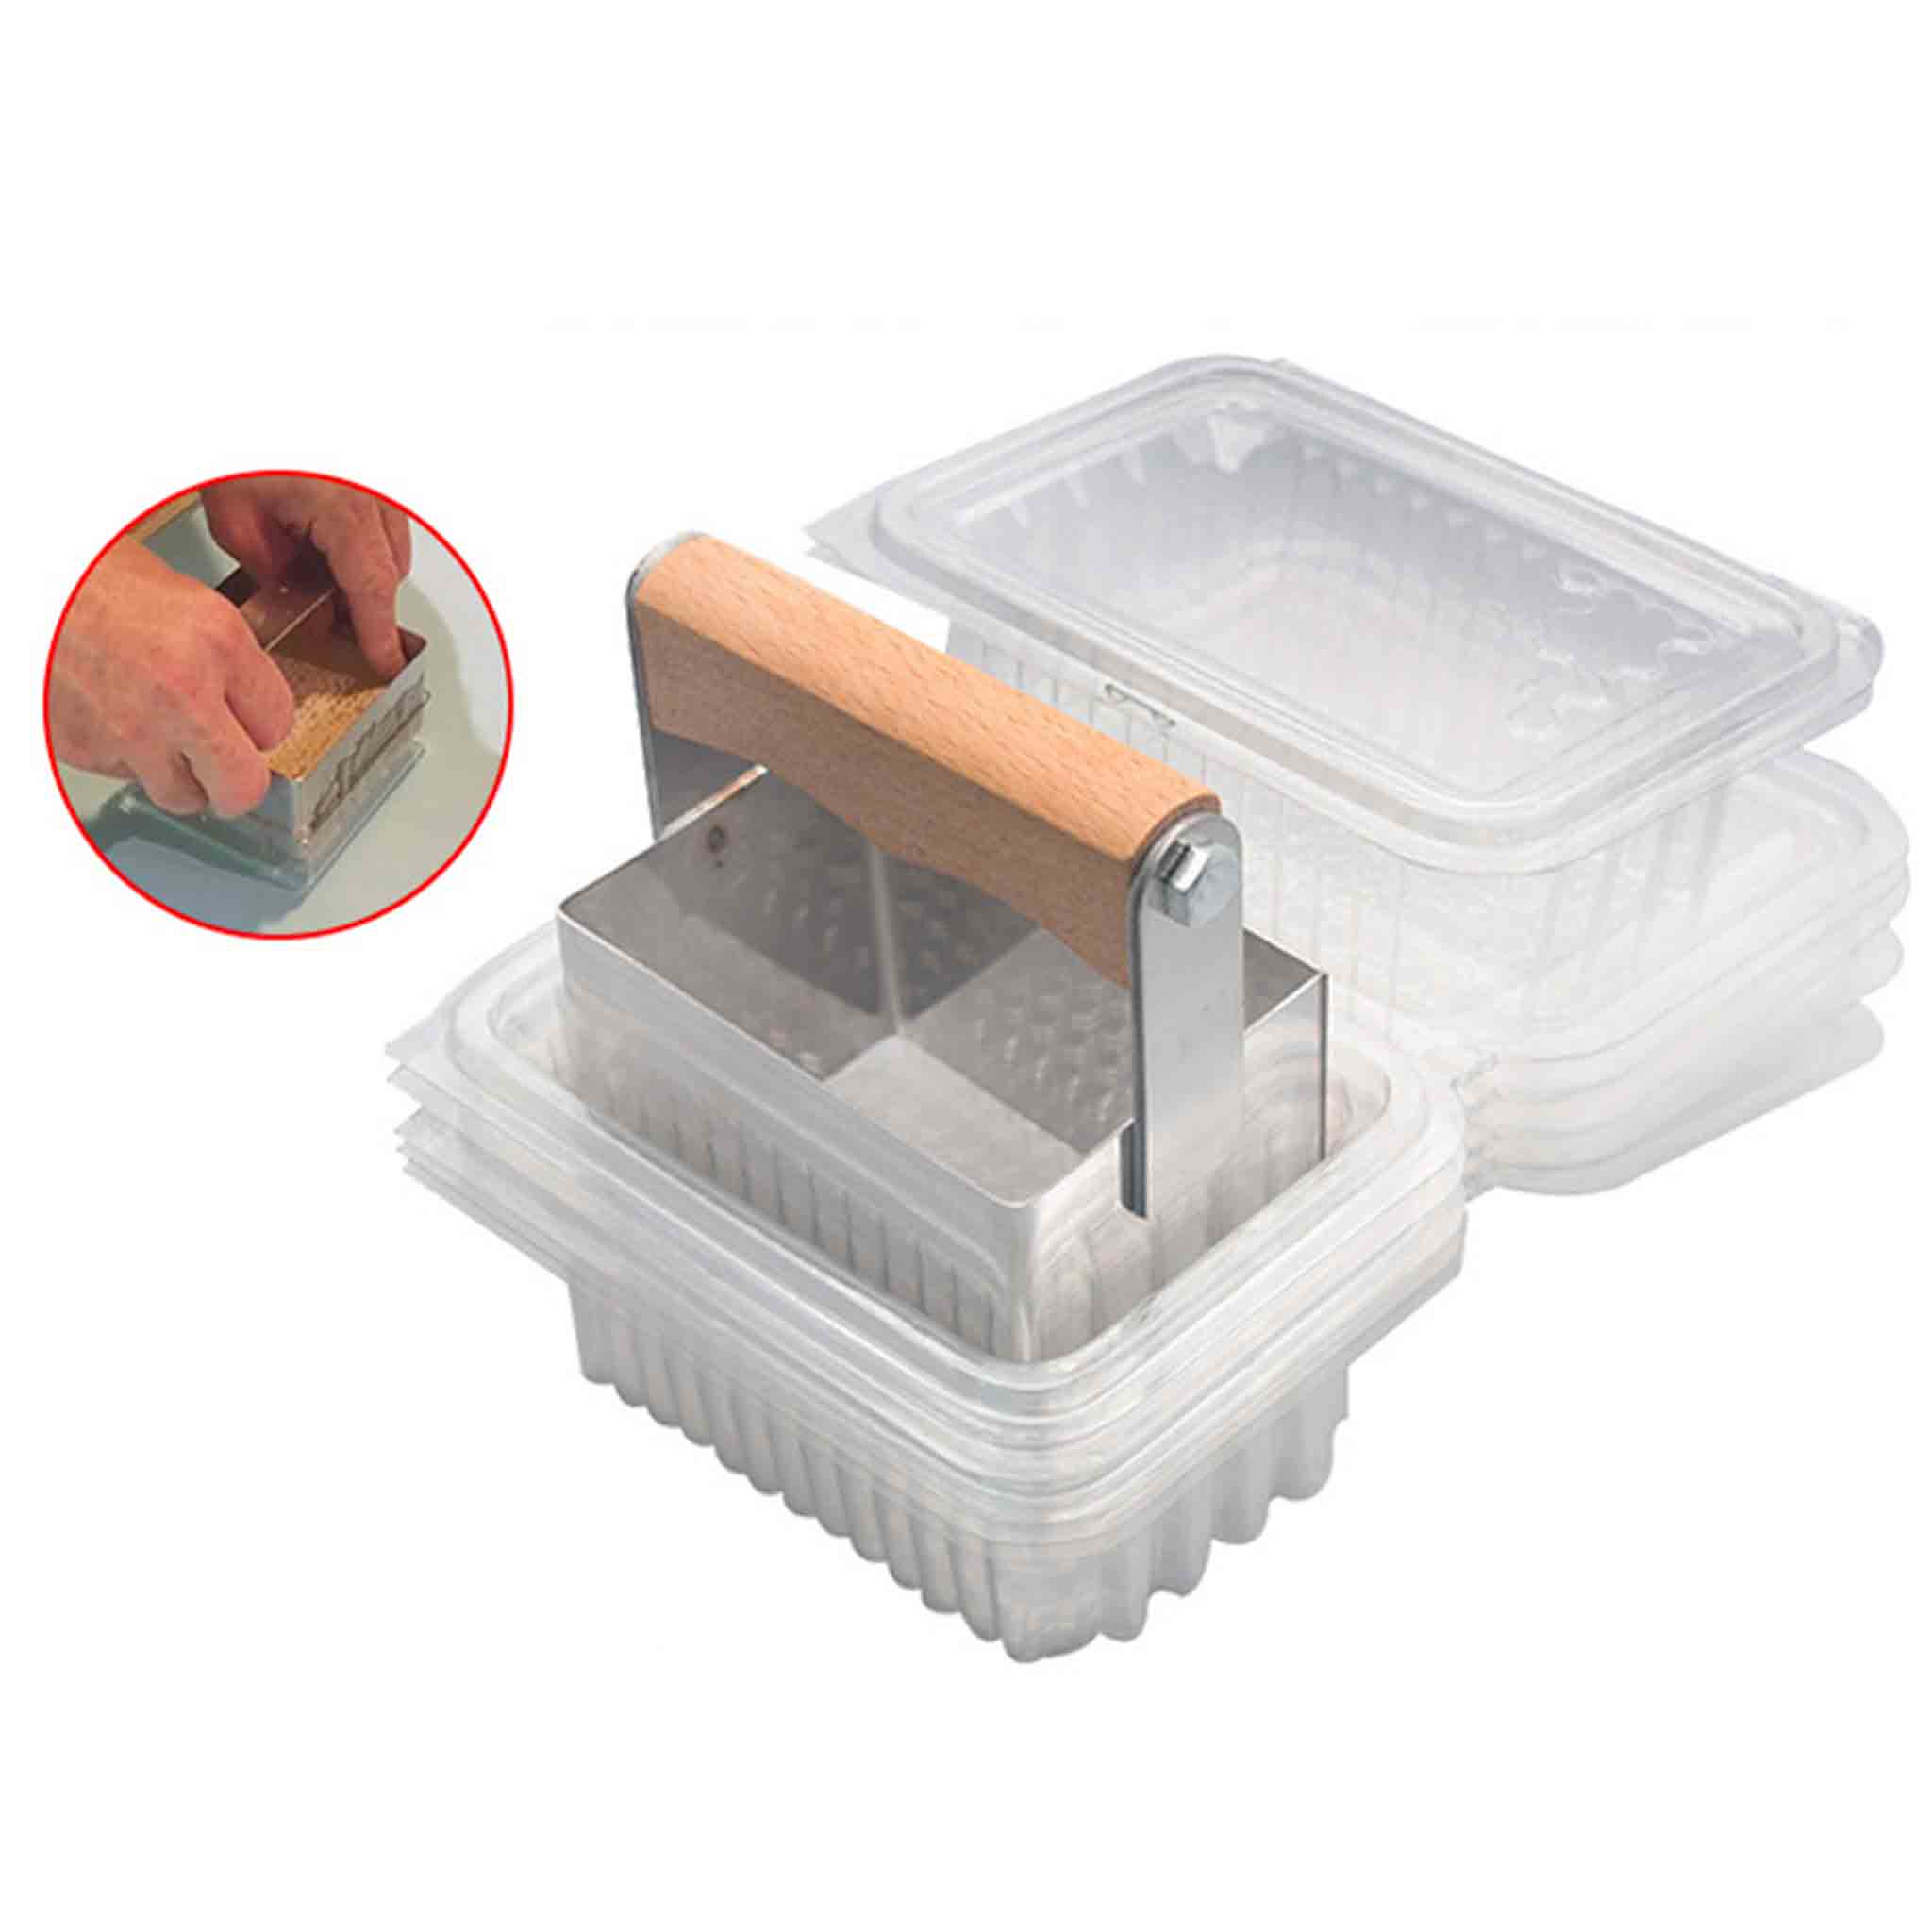 Honey Comb Packaging Container for Medium Sized Honey Comb - Processing collection by Buzzbee Beekeeping Supplies